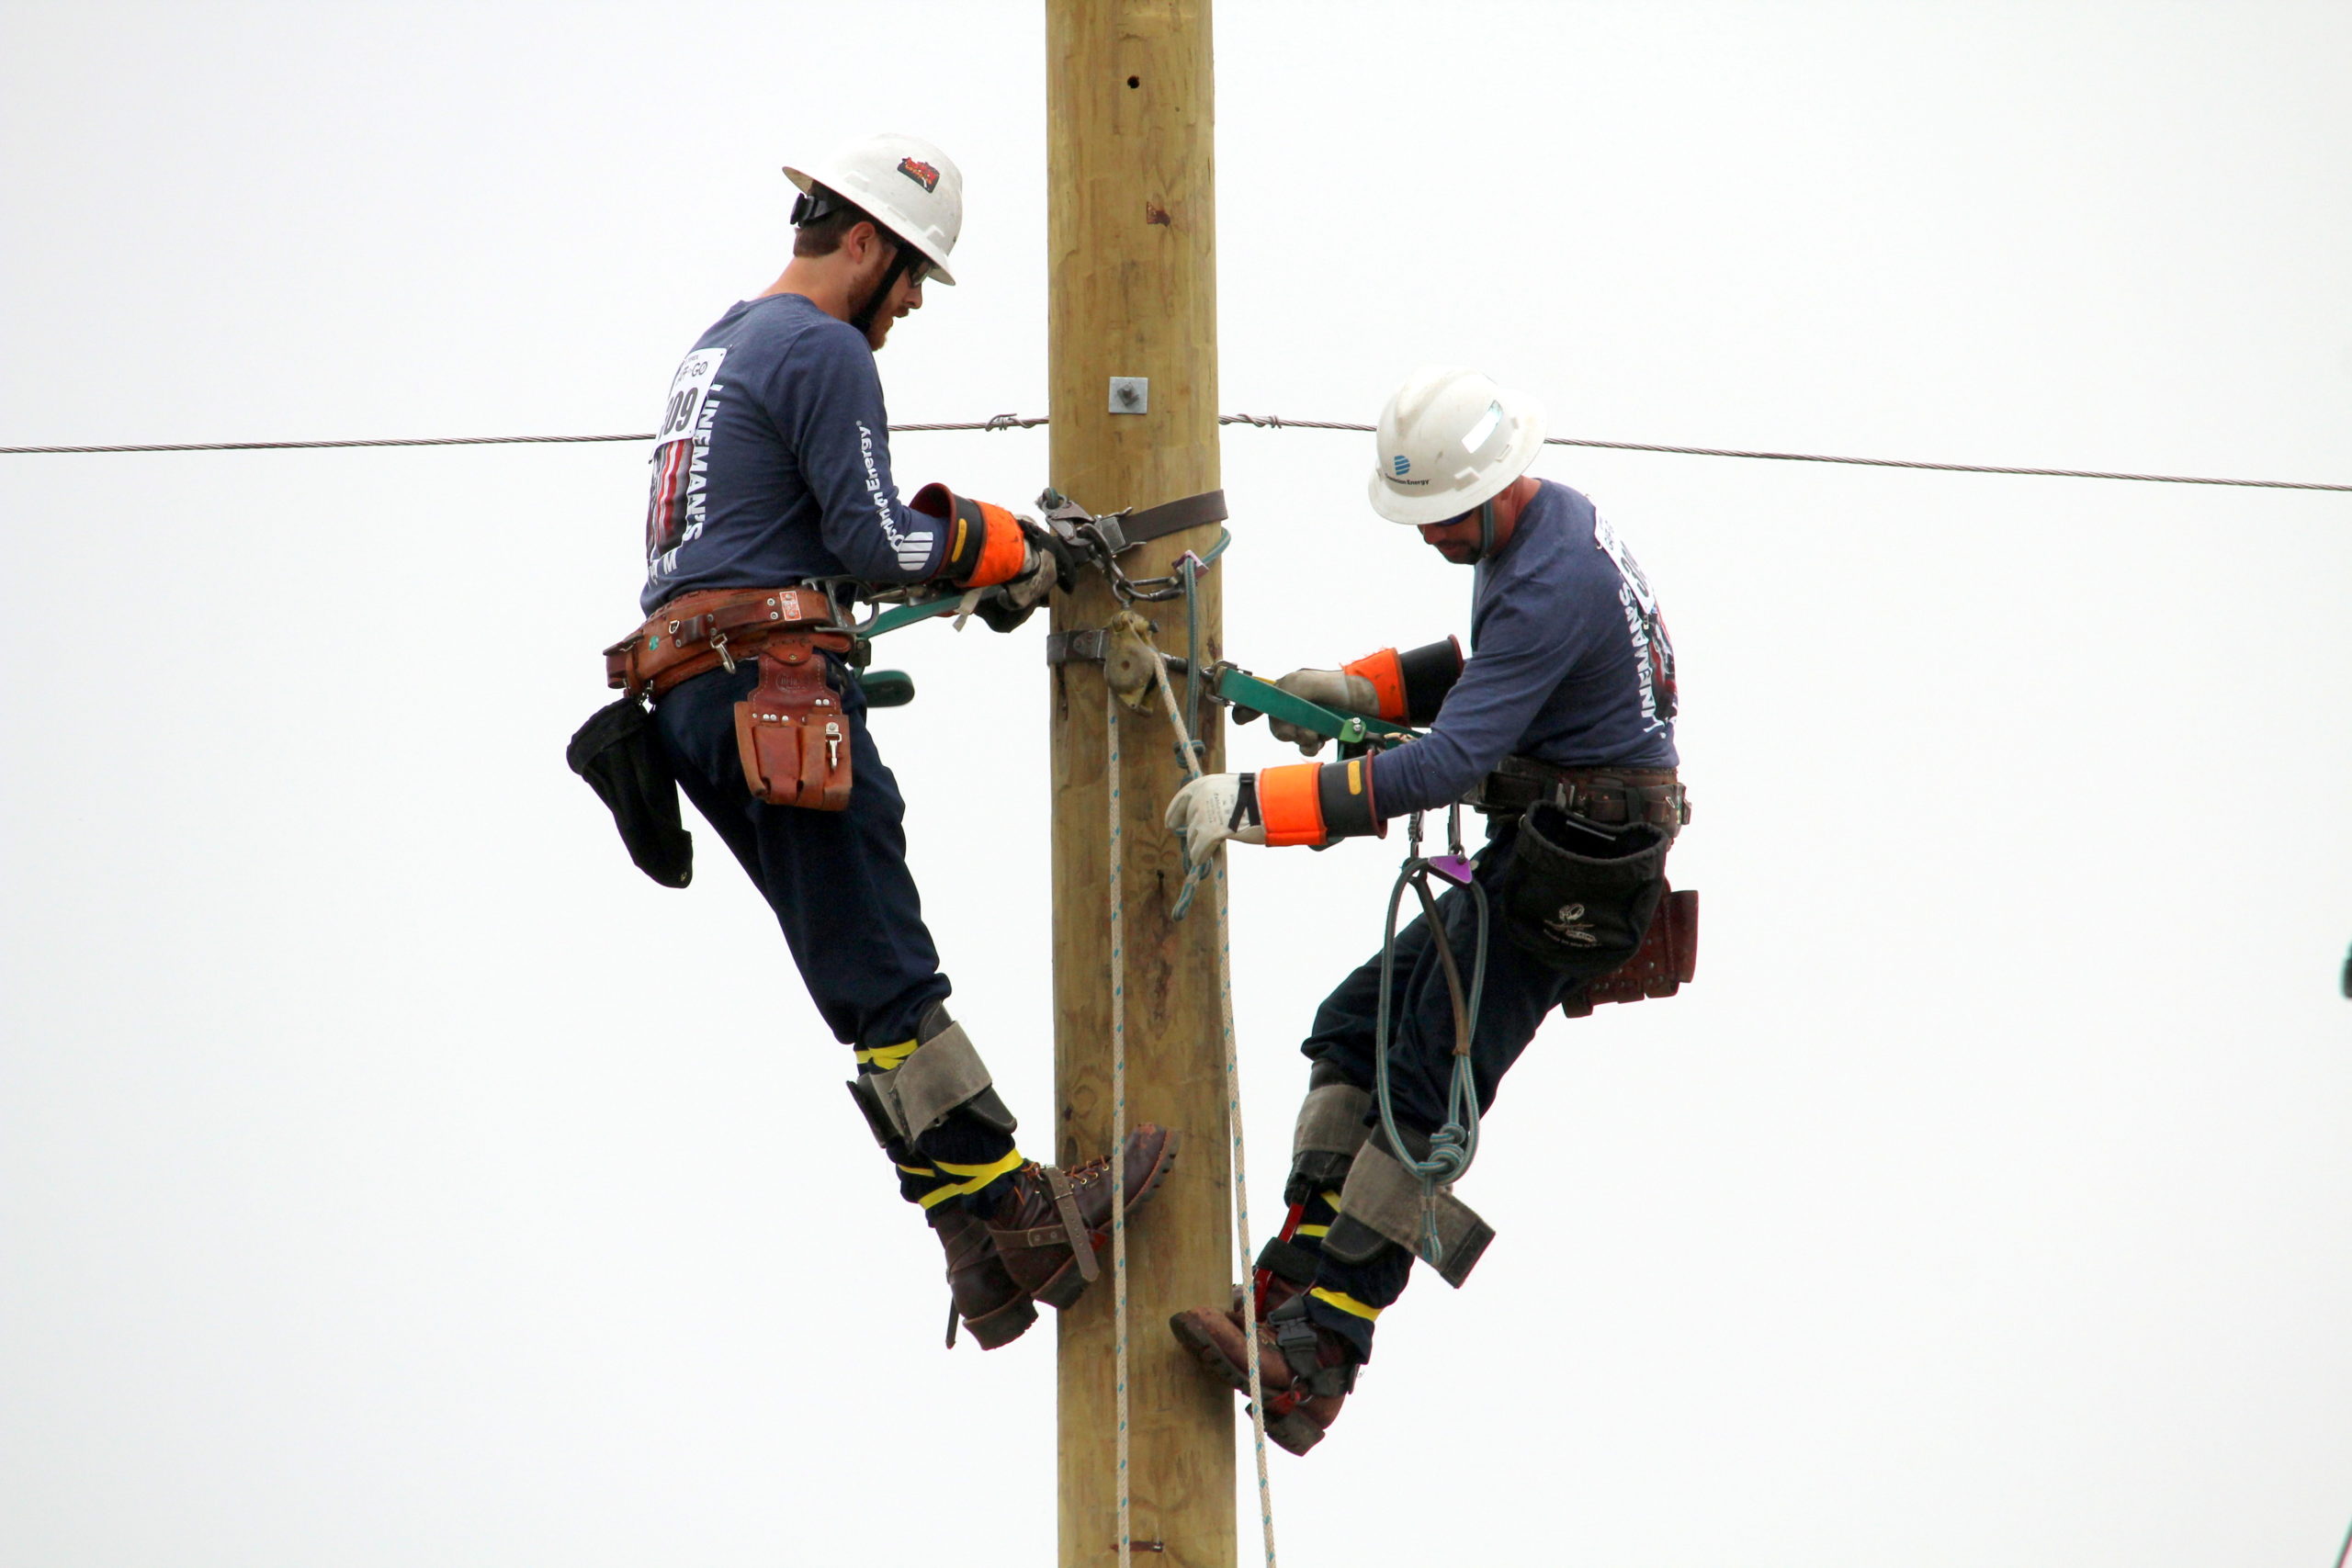 Dominion Energy lineworkers compete during Saturday’s events.